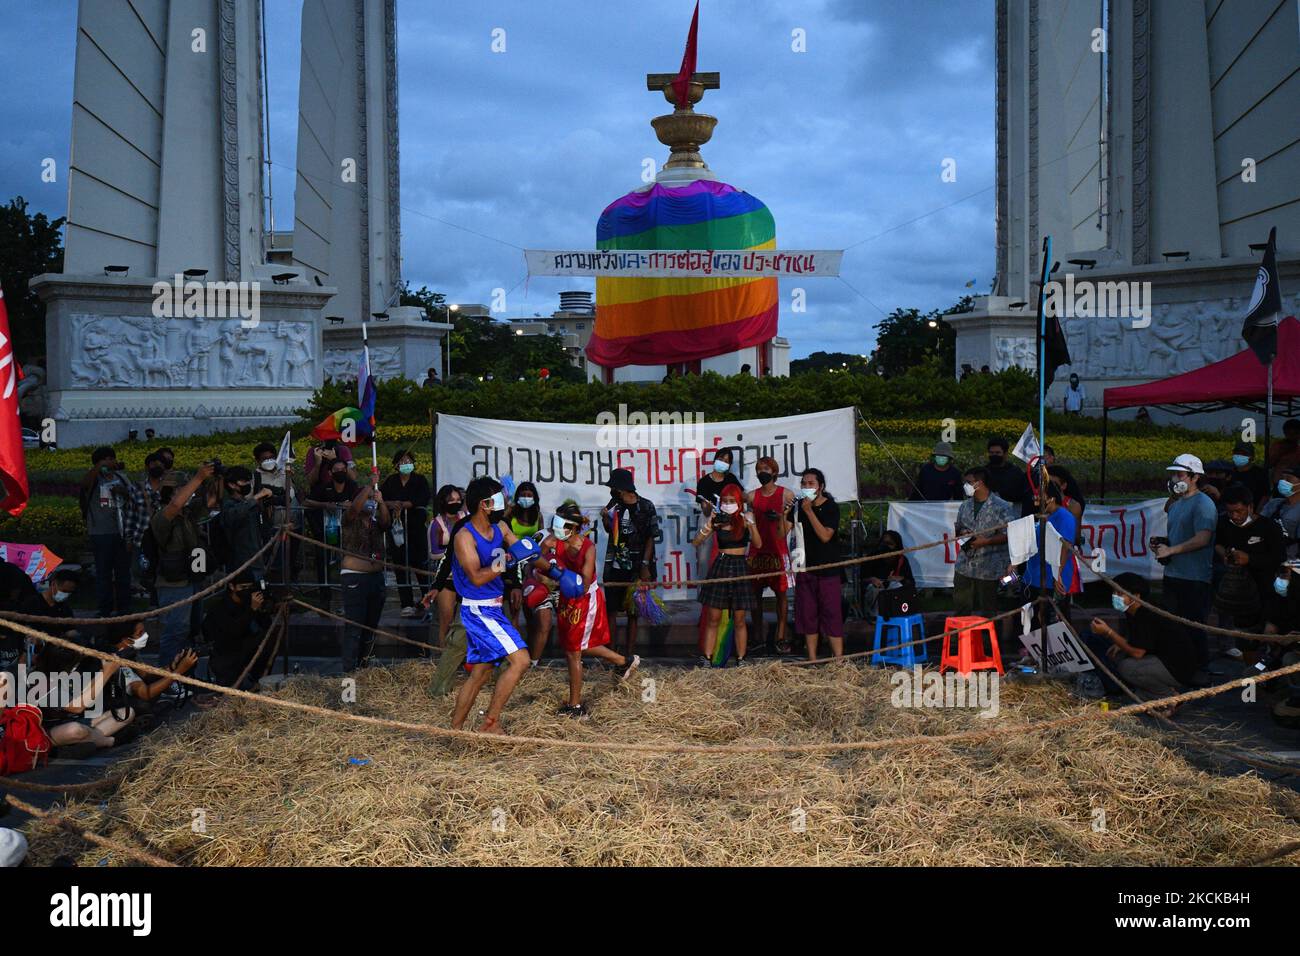 Protesters in a mask of pictures member of parliament perform in a boxing match during a protest to anti-government at Democracy Monument in Bangkok on August 28, 2021, in Bangkok, Thailand. (Photo by Vachira Vachira/NurPhoto) Stock Photo